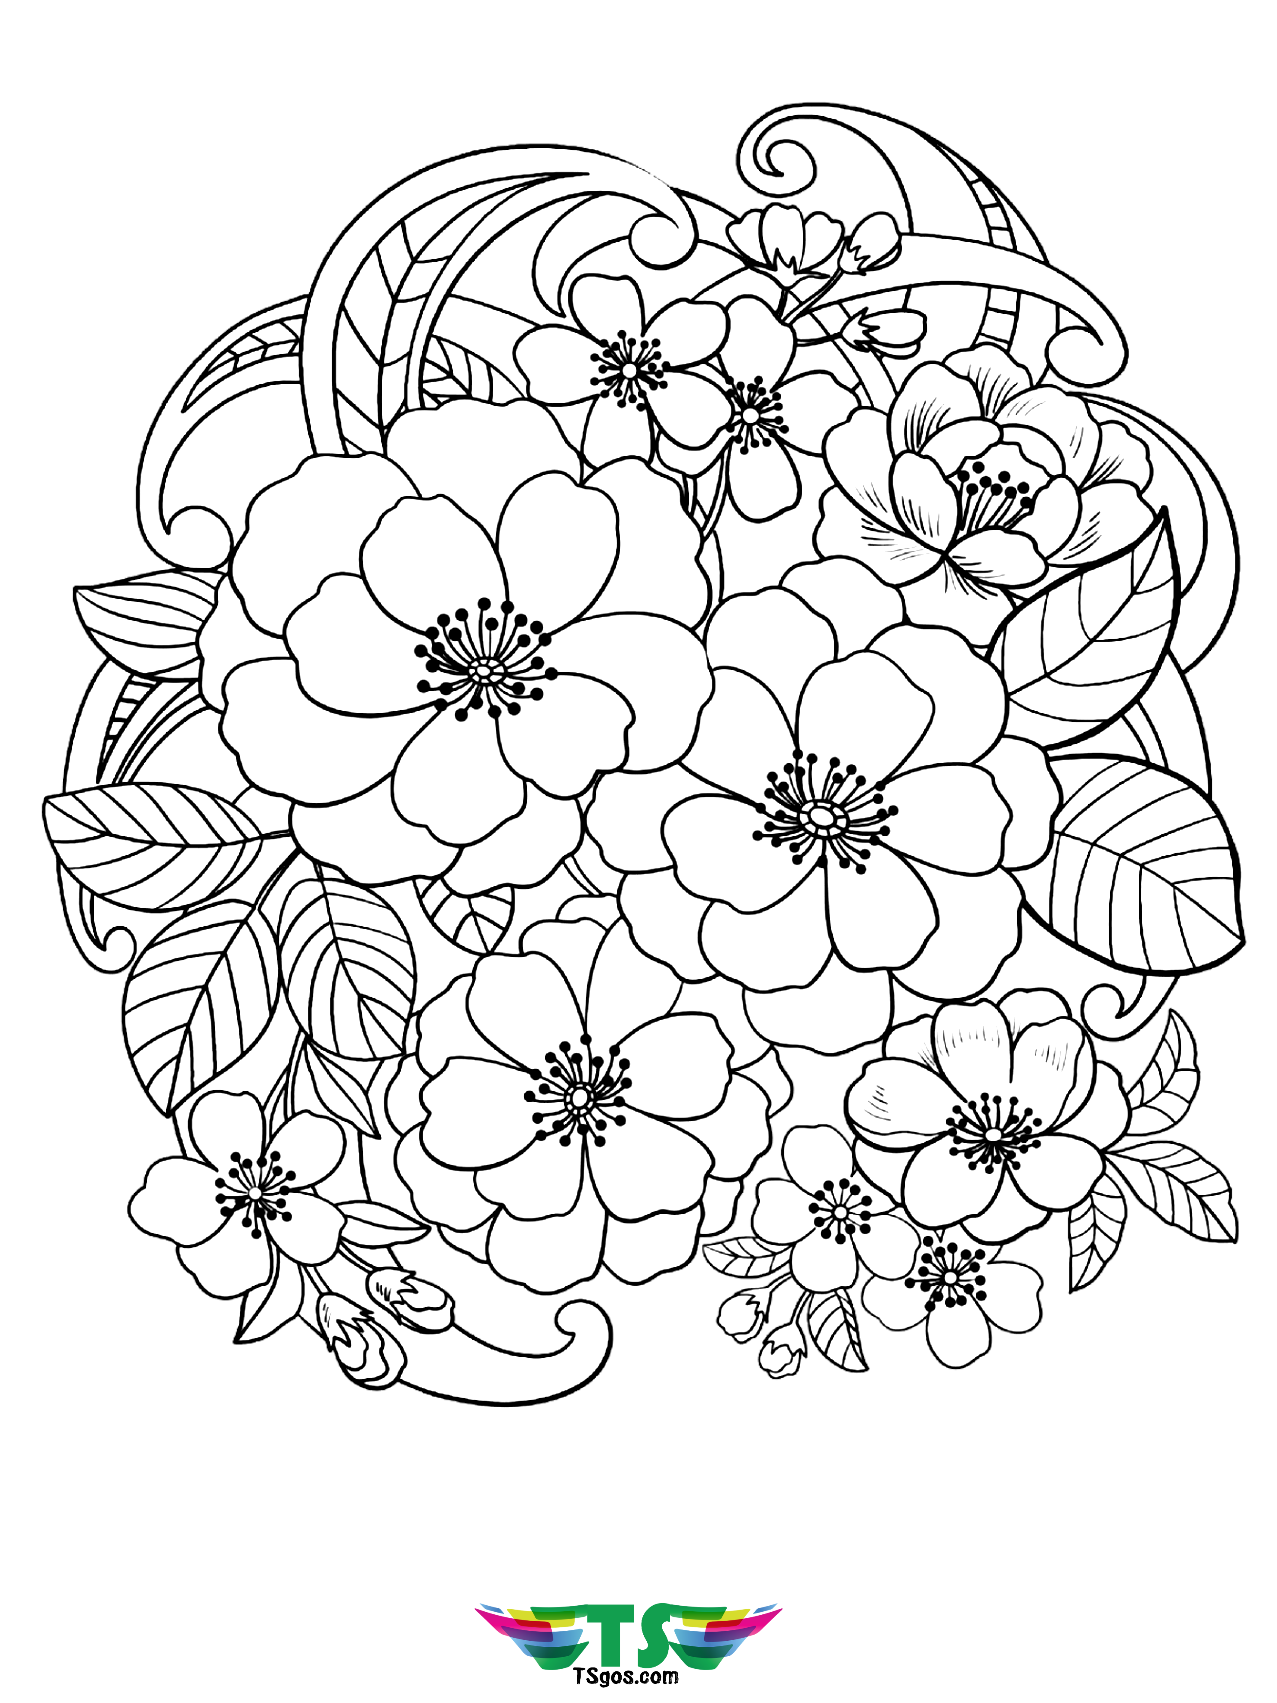 Free printable Beautiful flowers coloring page for kids   TSgos ...